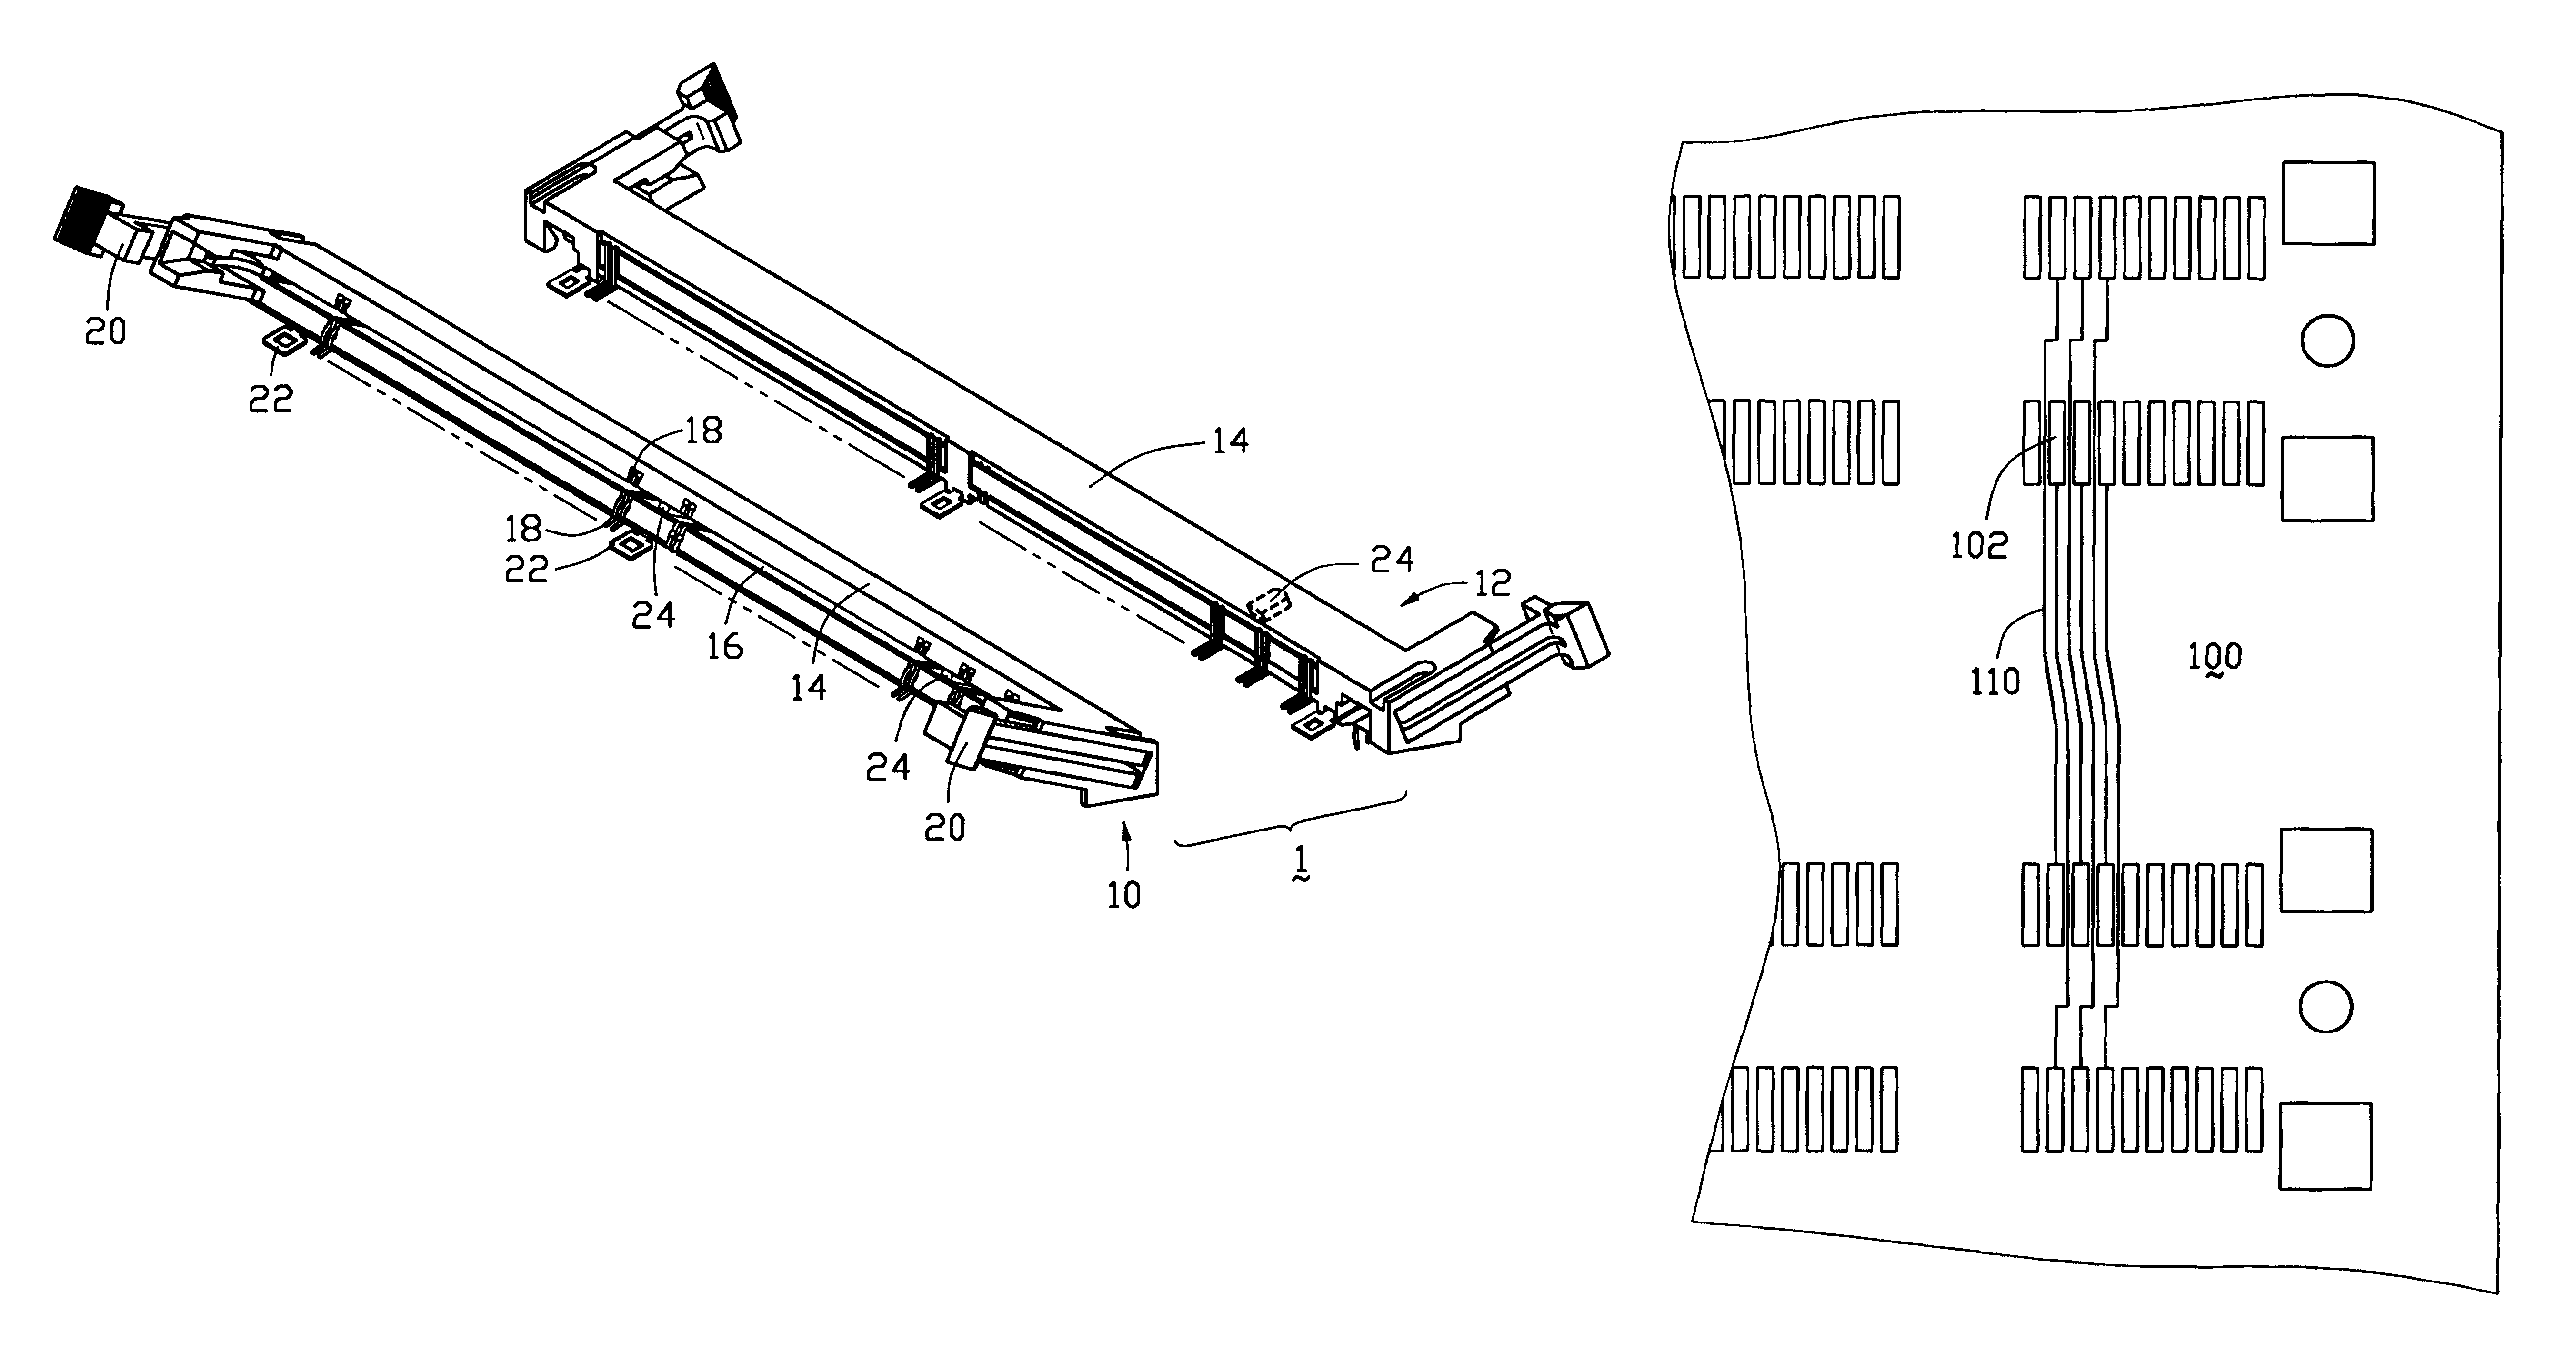 Card edge connector assembly with ejectors for linear installation/ejection and the associated printed circuit board for use therewith